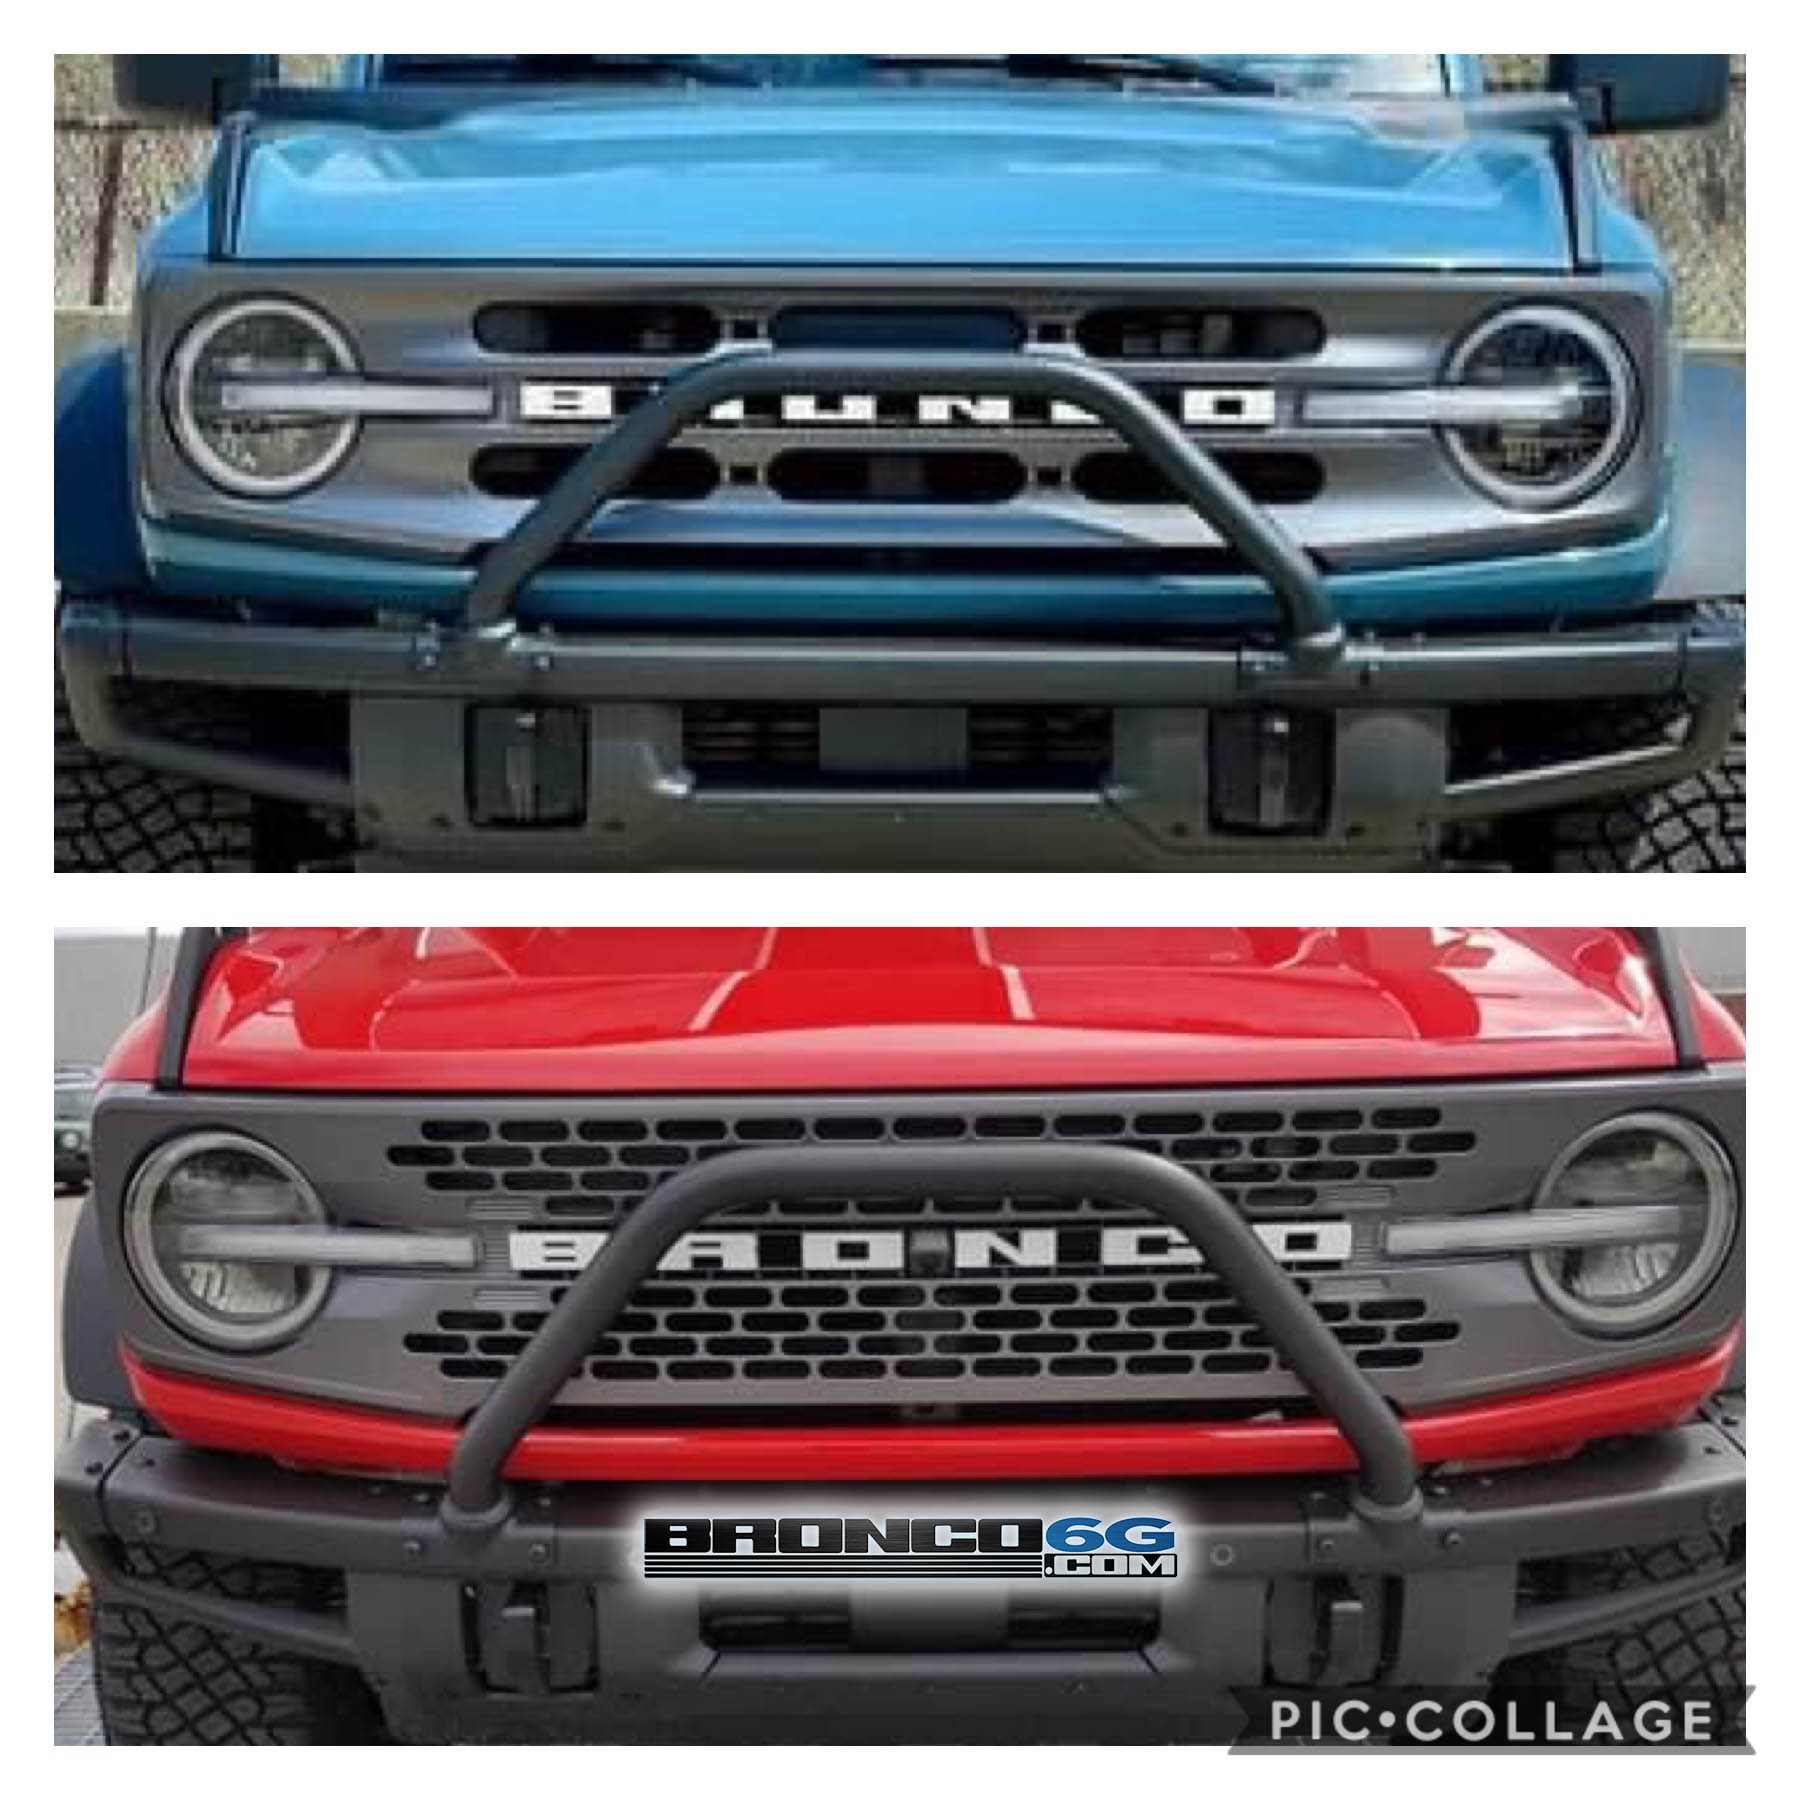 Ford Bronco New Improved Brush Guard / Bull Bar Design and Location on Race Red Bronco Badlands! New vs Old Brush Bar Guard : Bull Bar 2021 Bronco